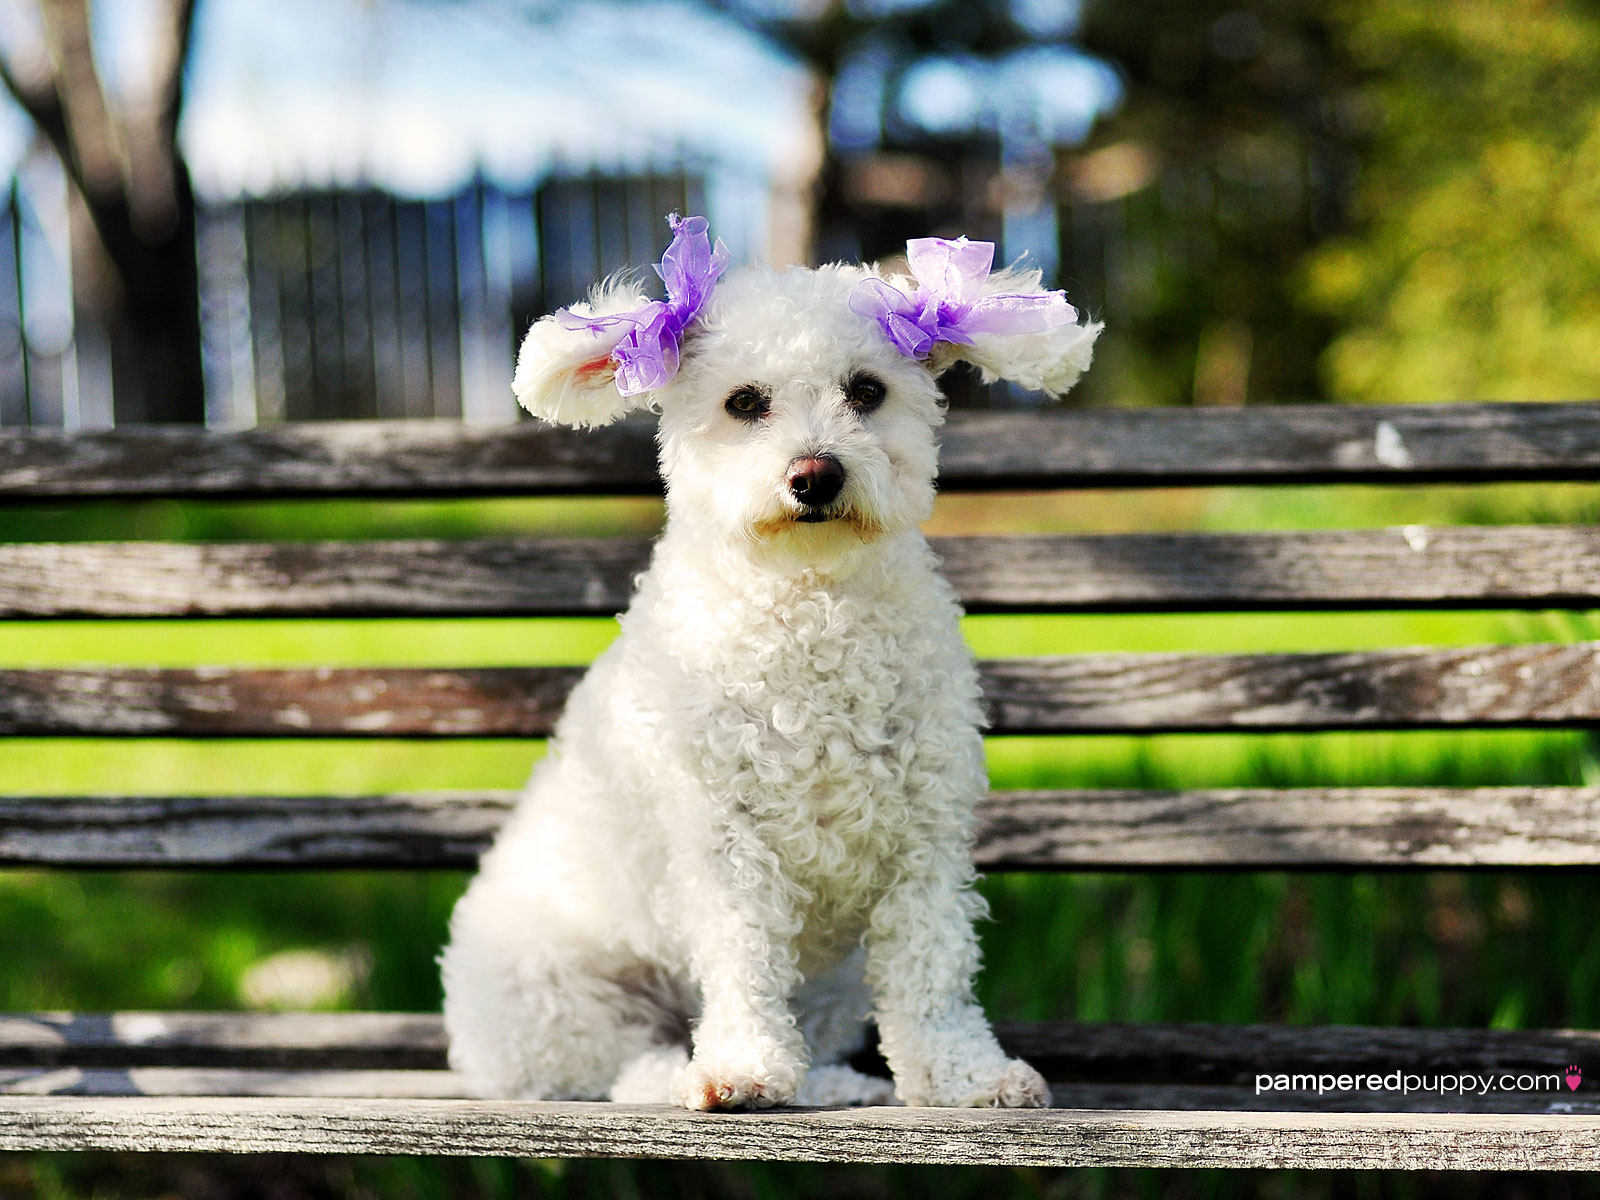 Cute White Poodle Dog Sitting On Table With Purple Ribbon